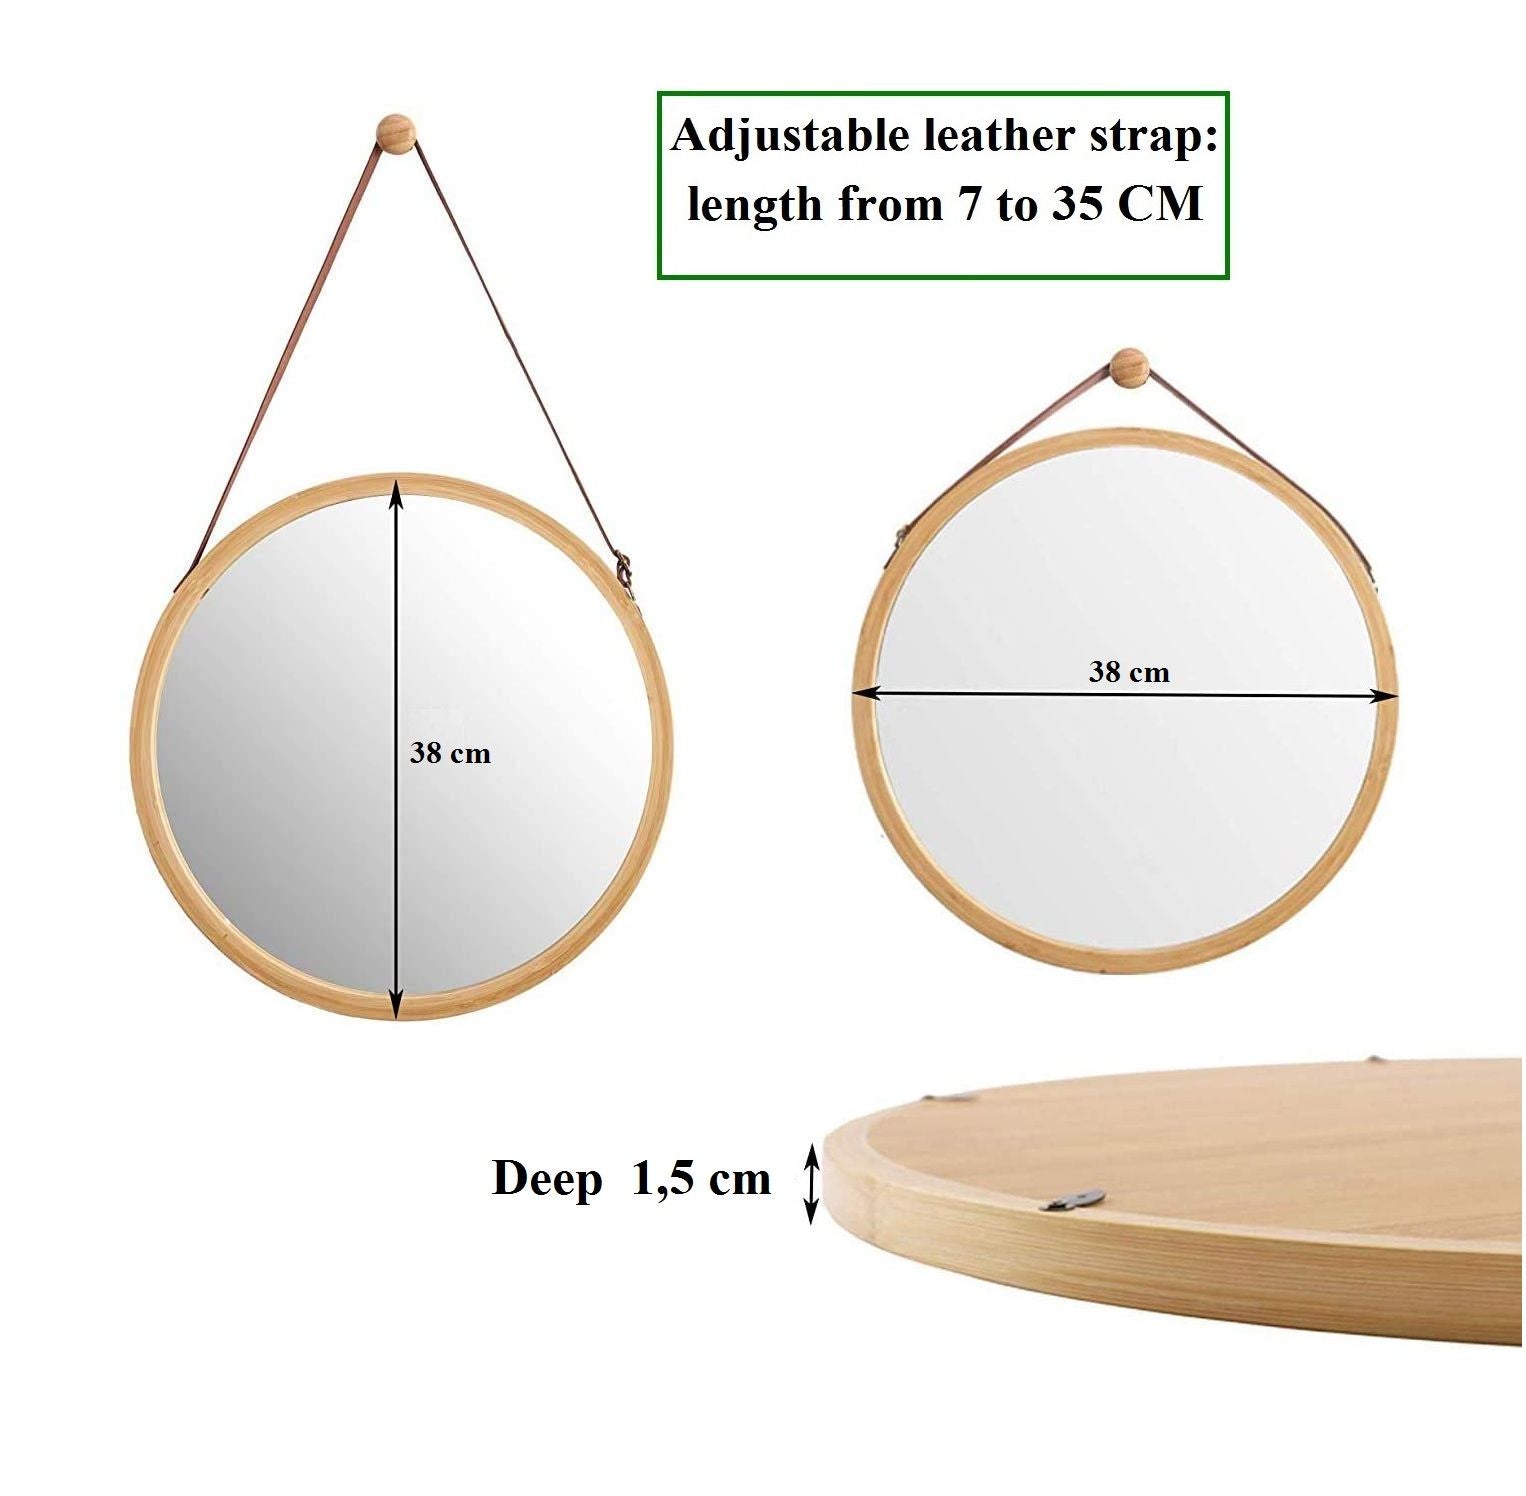 Hanging Round Wall Mirror 38 cm - Solid Bamboo Frame and Adjustable Leather Strap for Bathroom and Bedroom - BM House & Garden